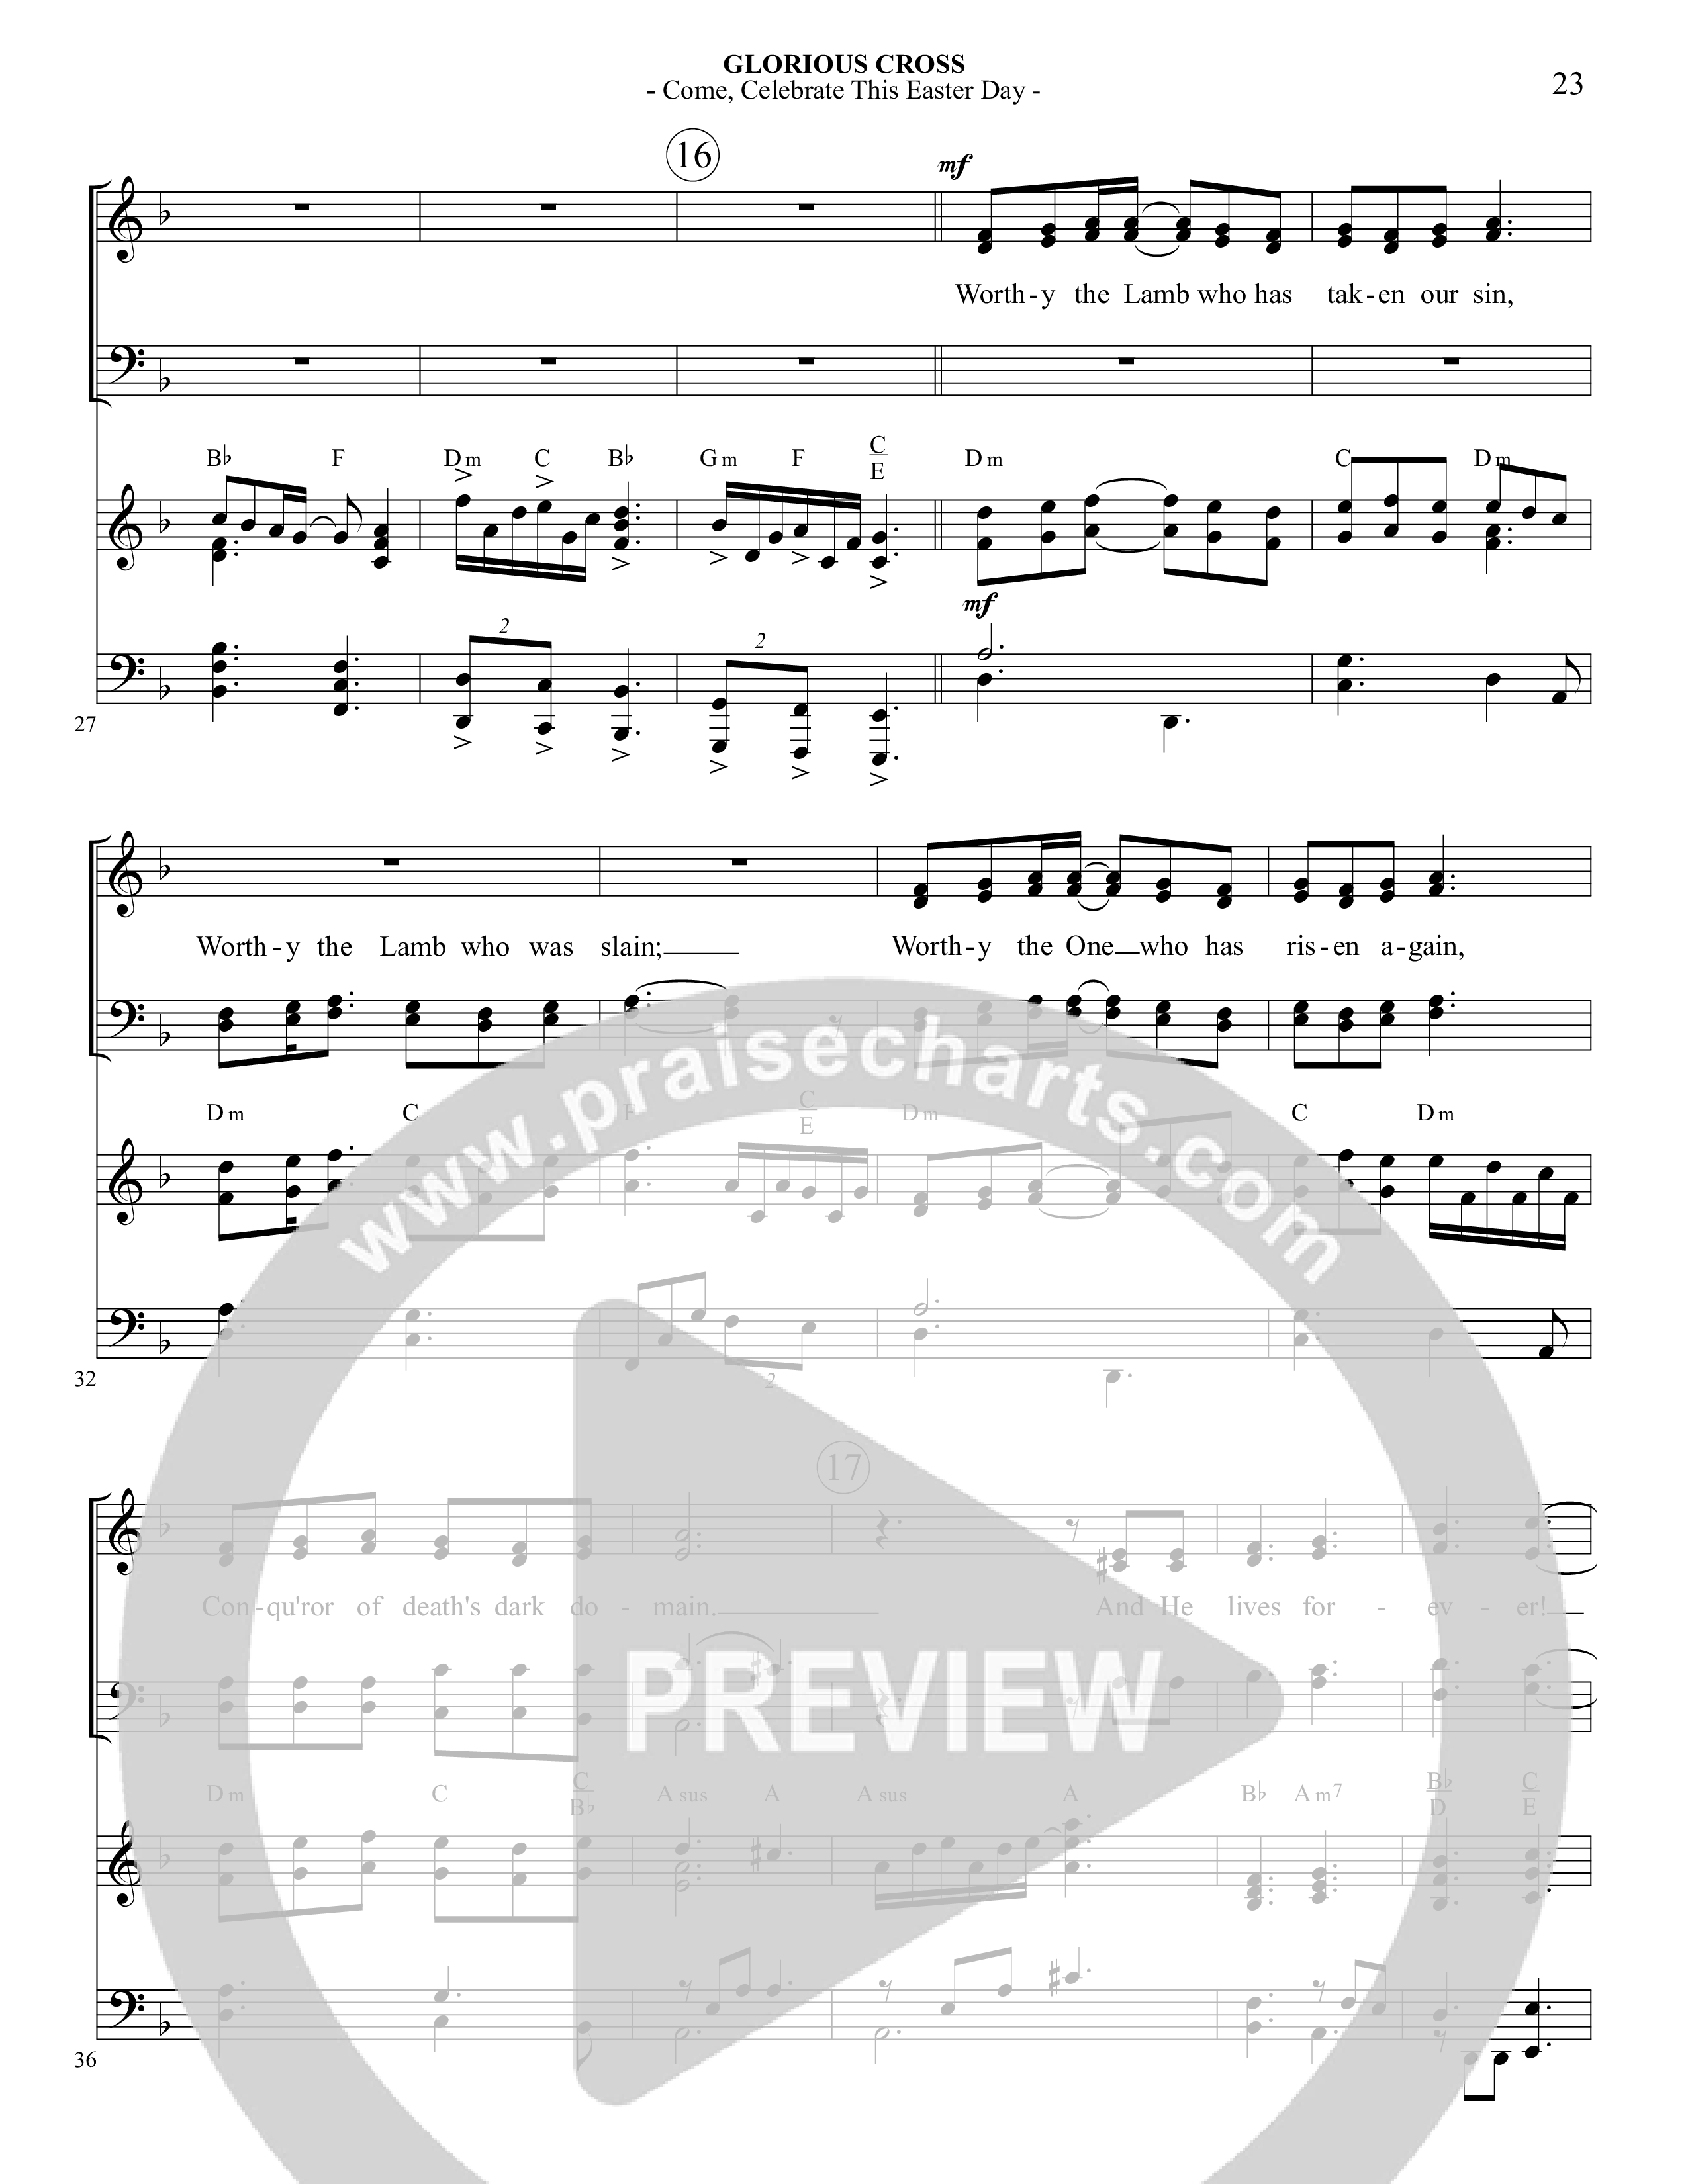 Glorious Cross (5 Song Choral Collection) Song 4 (Piano SATB) (Foster Music Group / Arr. Marty Parks)